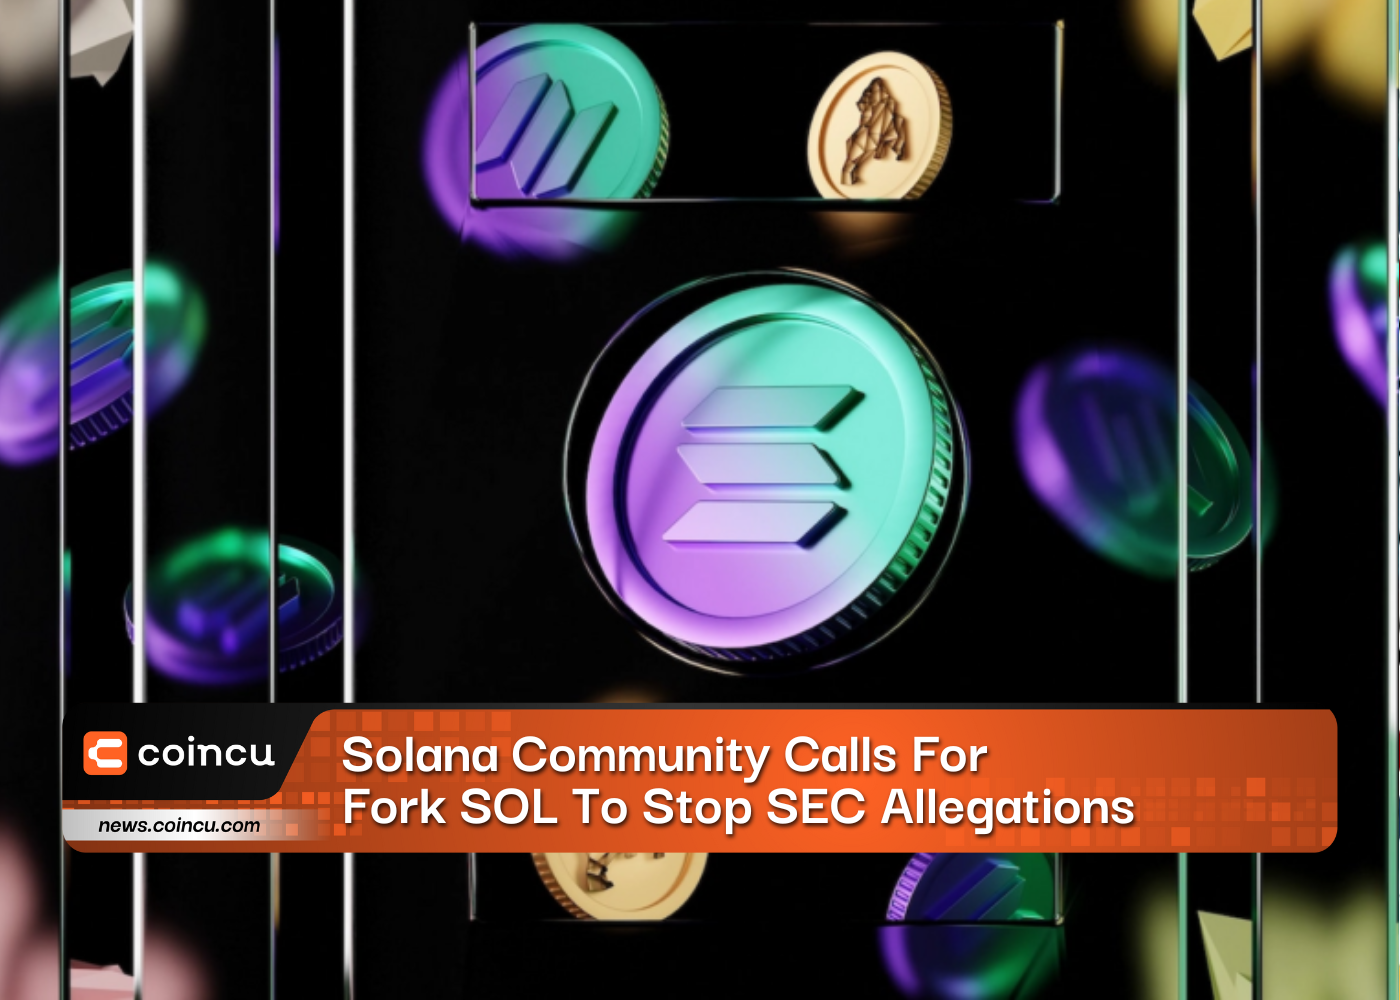 Solana Community Calls For Fork SOL To Stop SEC Allegations